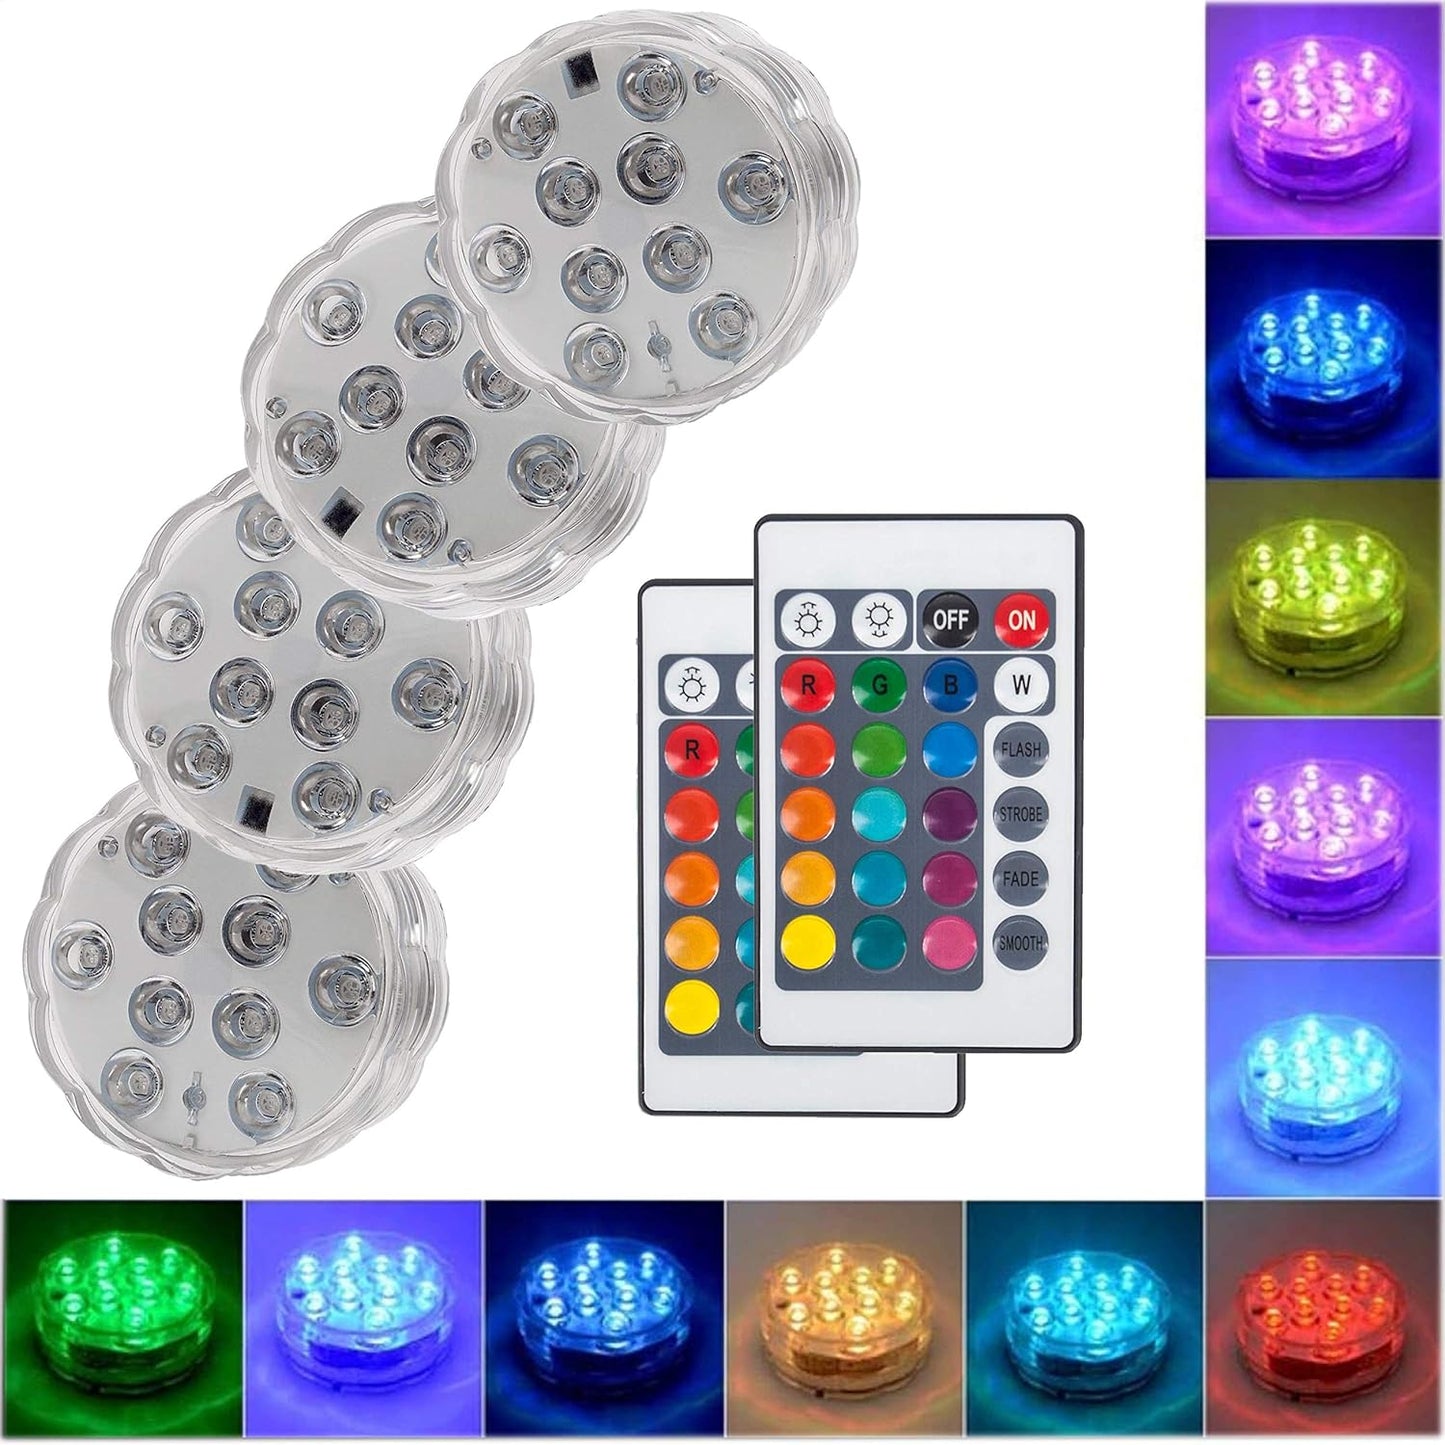 Submersible LED Pool Lights 4-Pack